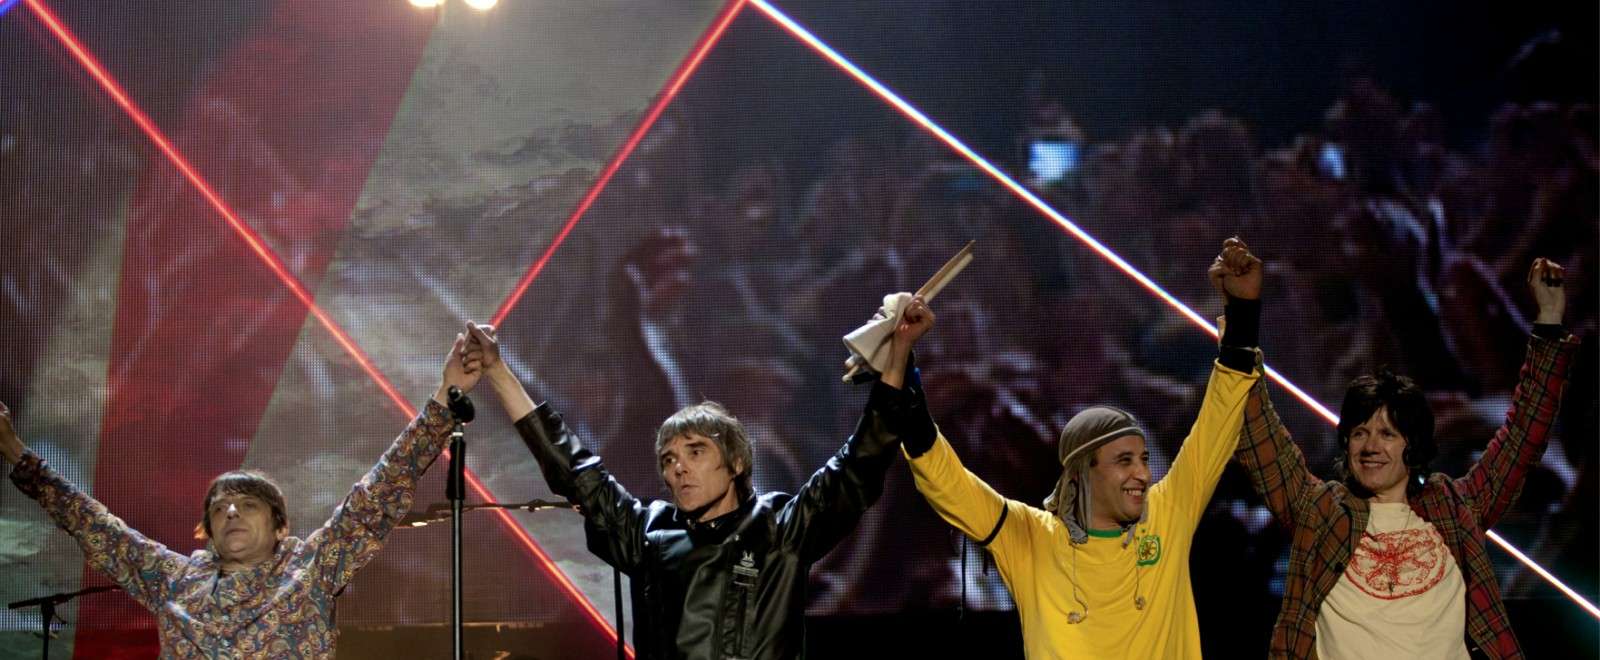 THE STONE ROSES: MADE OF STONE  trailer